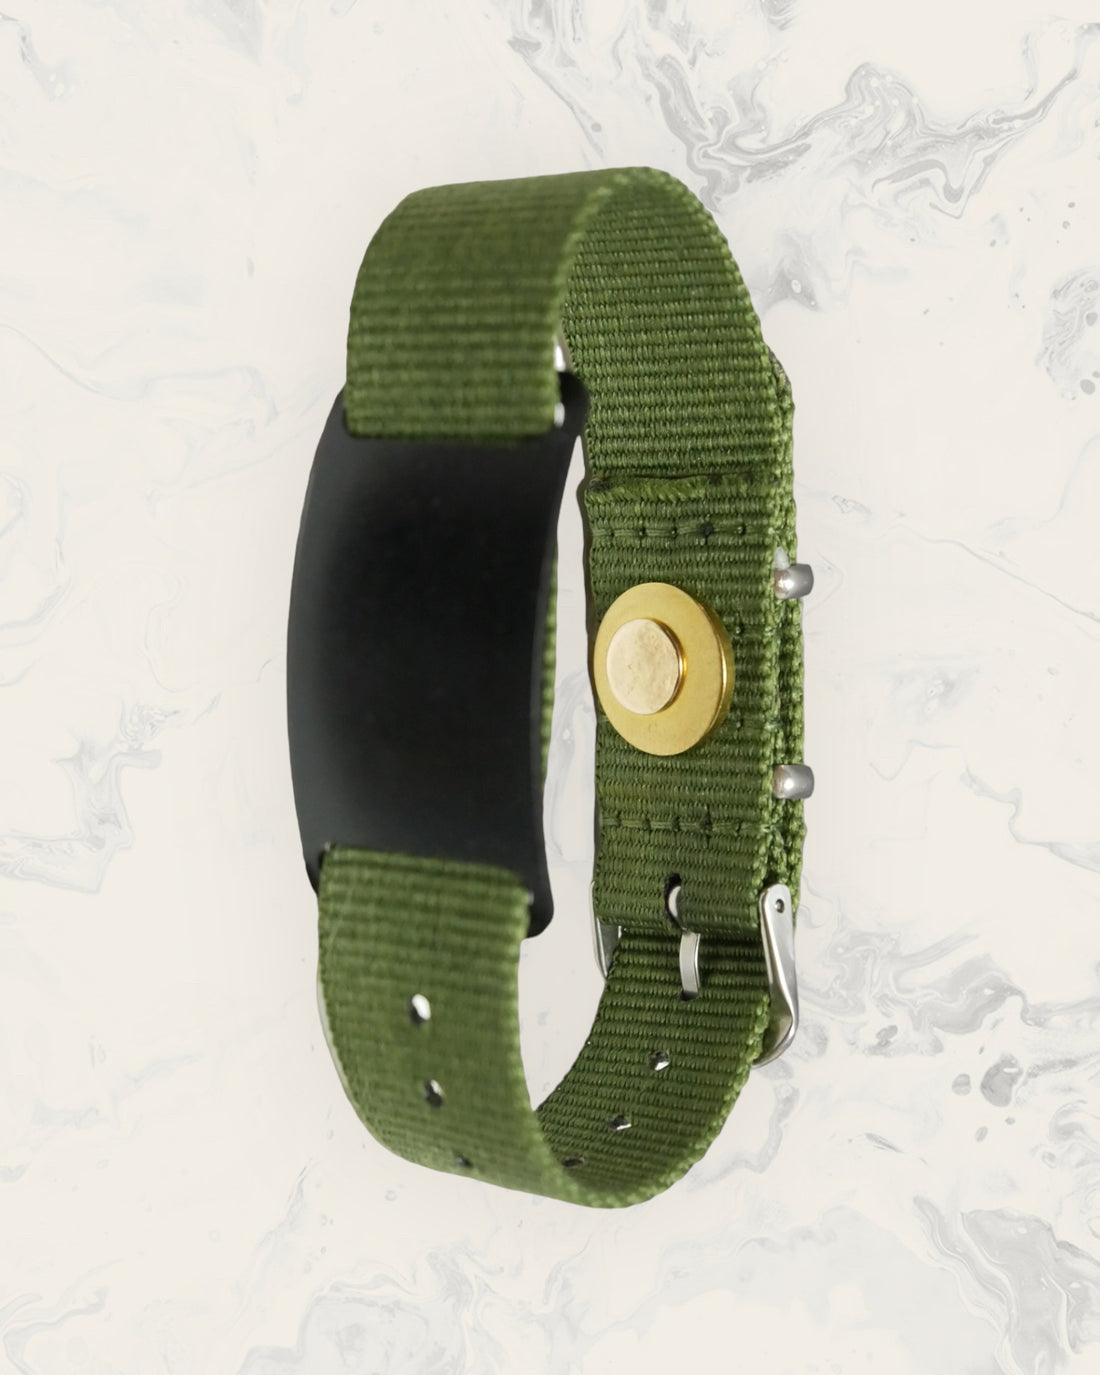 Natural Pain Relief and EMF Protection Bracelet Nylon Band Color Army Green with a Black Slider